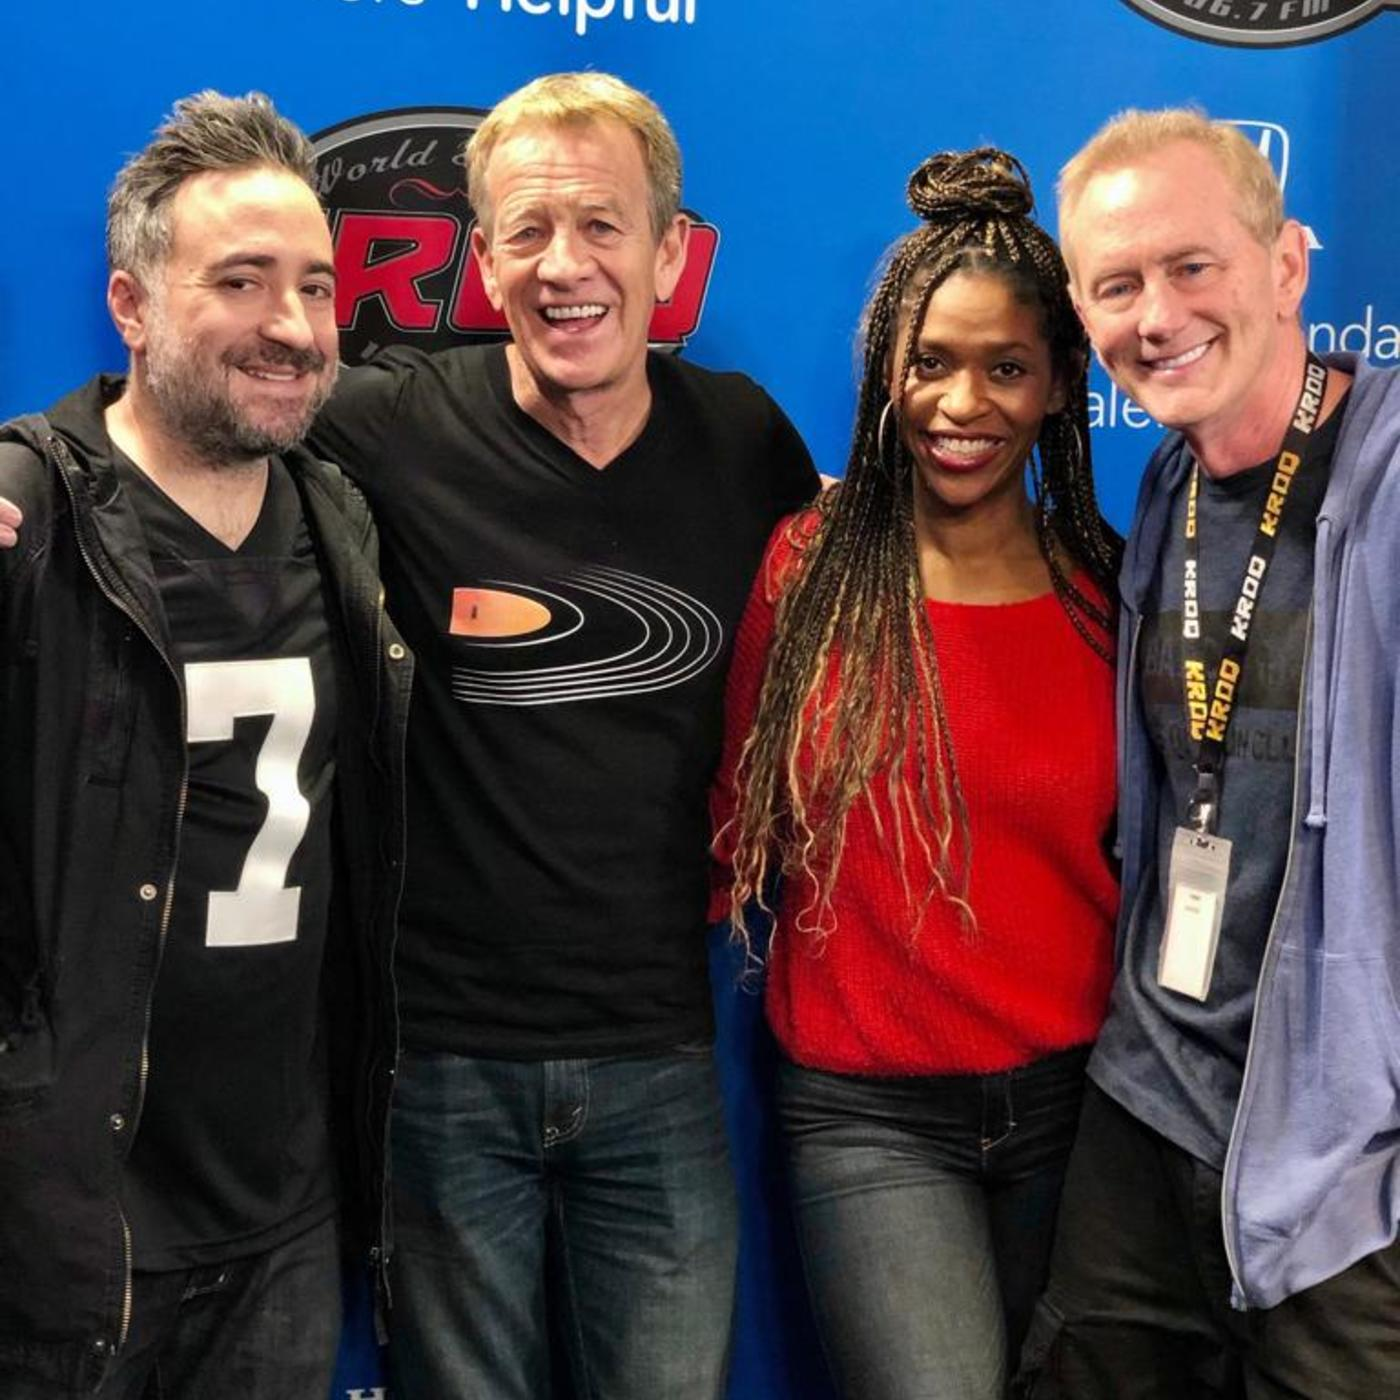 K&B Podcast: Wednesday, November 27th with guests Merrin Dungey, RJ Bell and Richard Blade